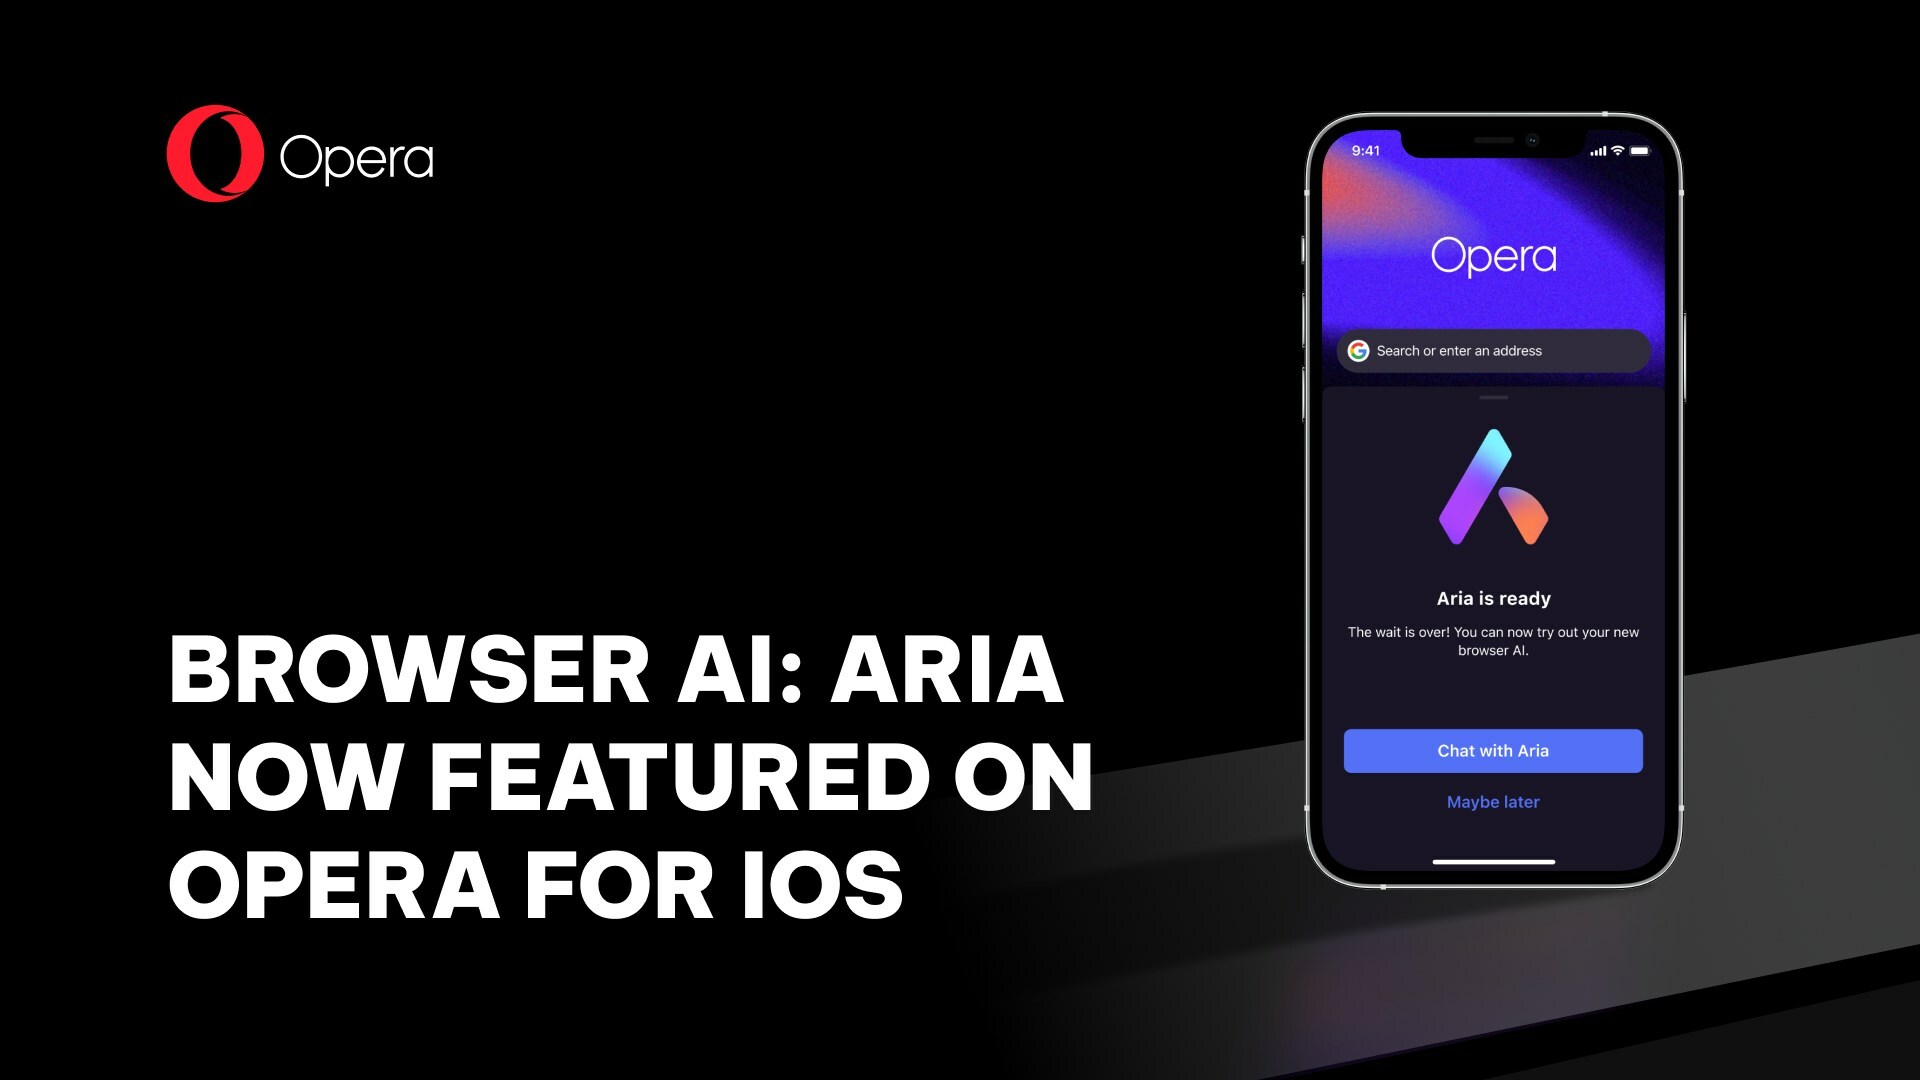 Opera adds Aria to Opera for iOS, bringing free browser AI to all major platforms